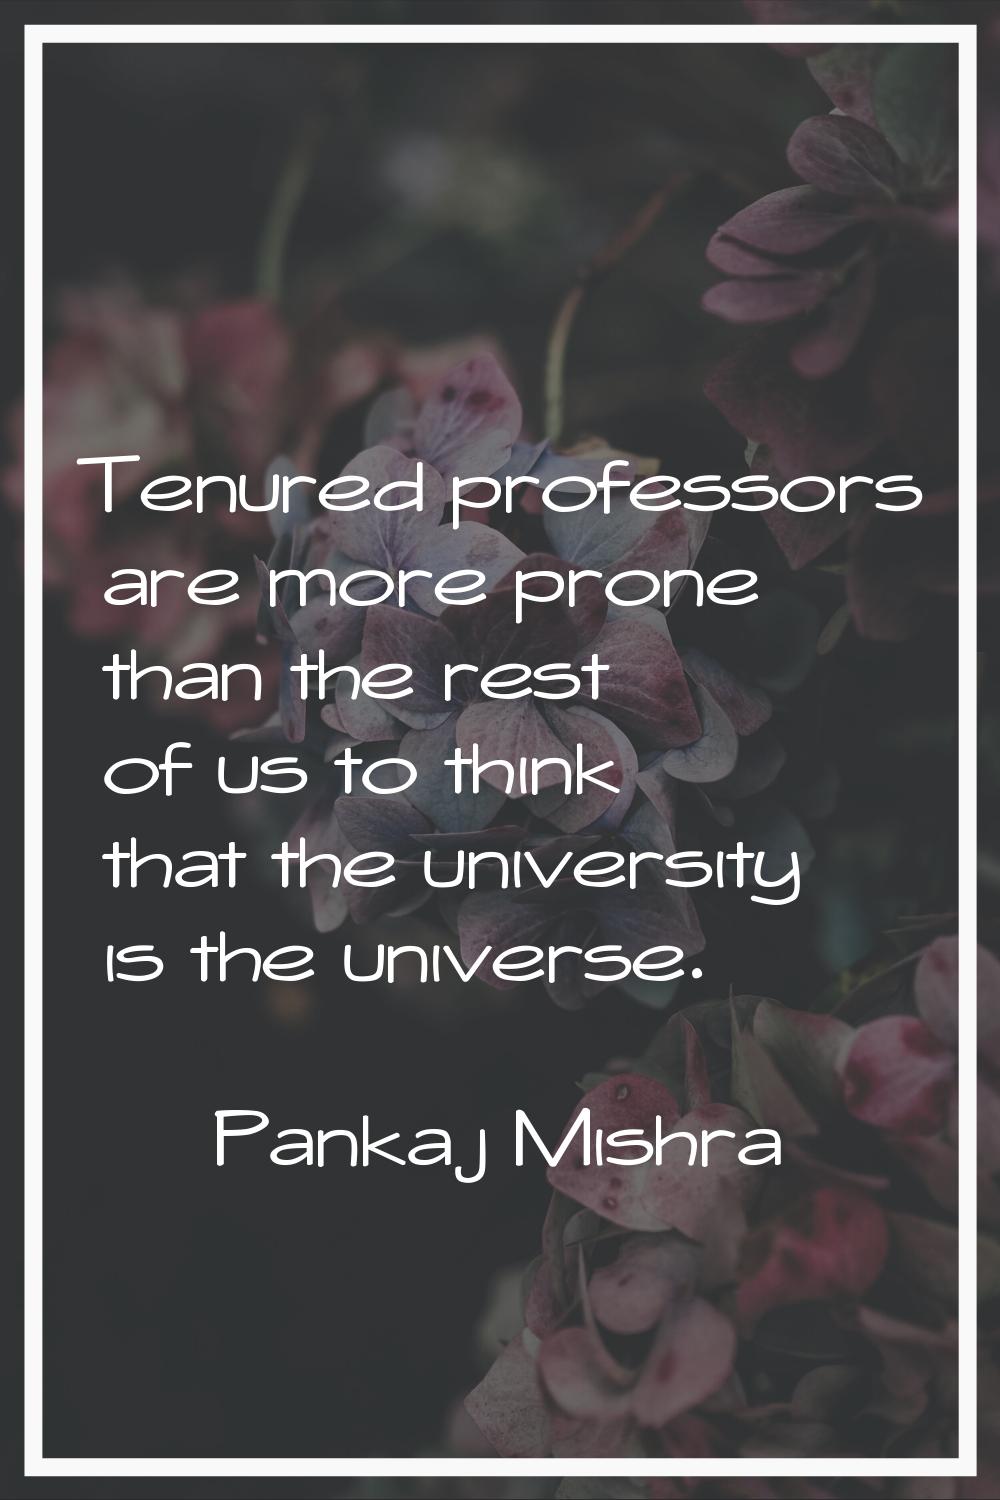 Tenured professors are more prone than the rest of us to think that the university is the universe.